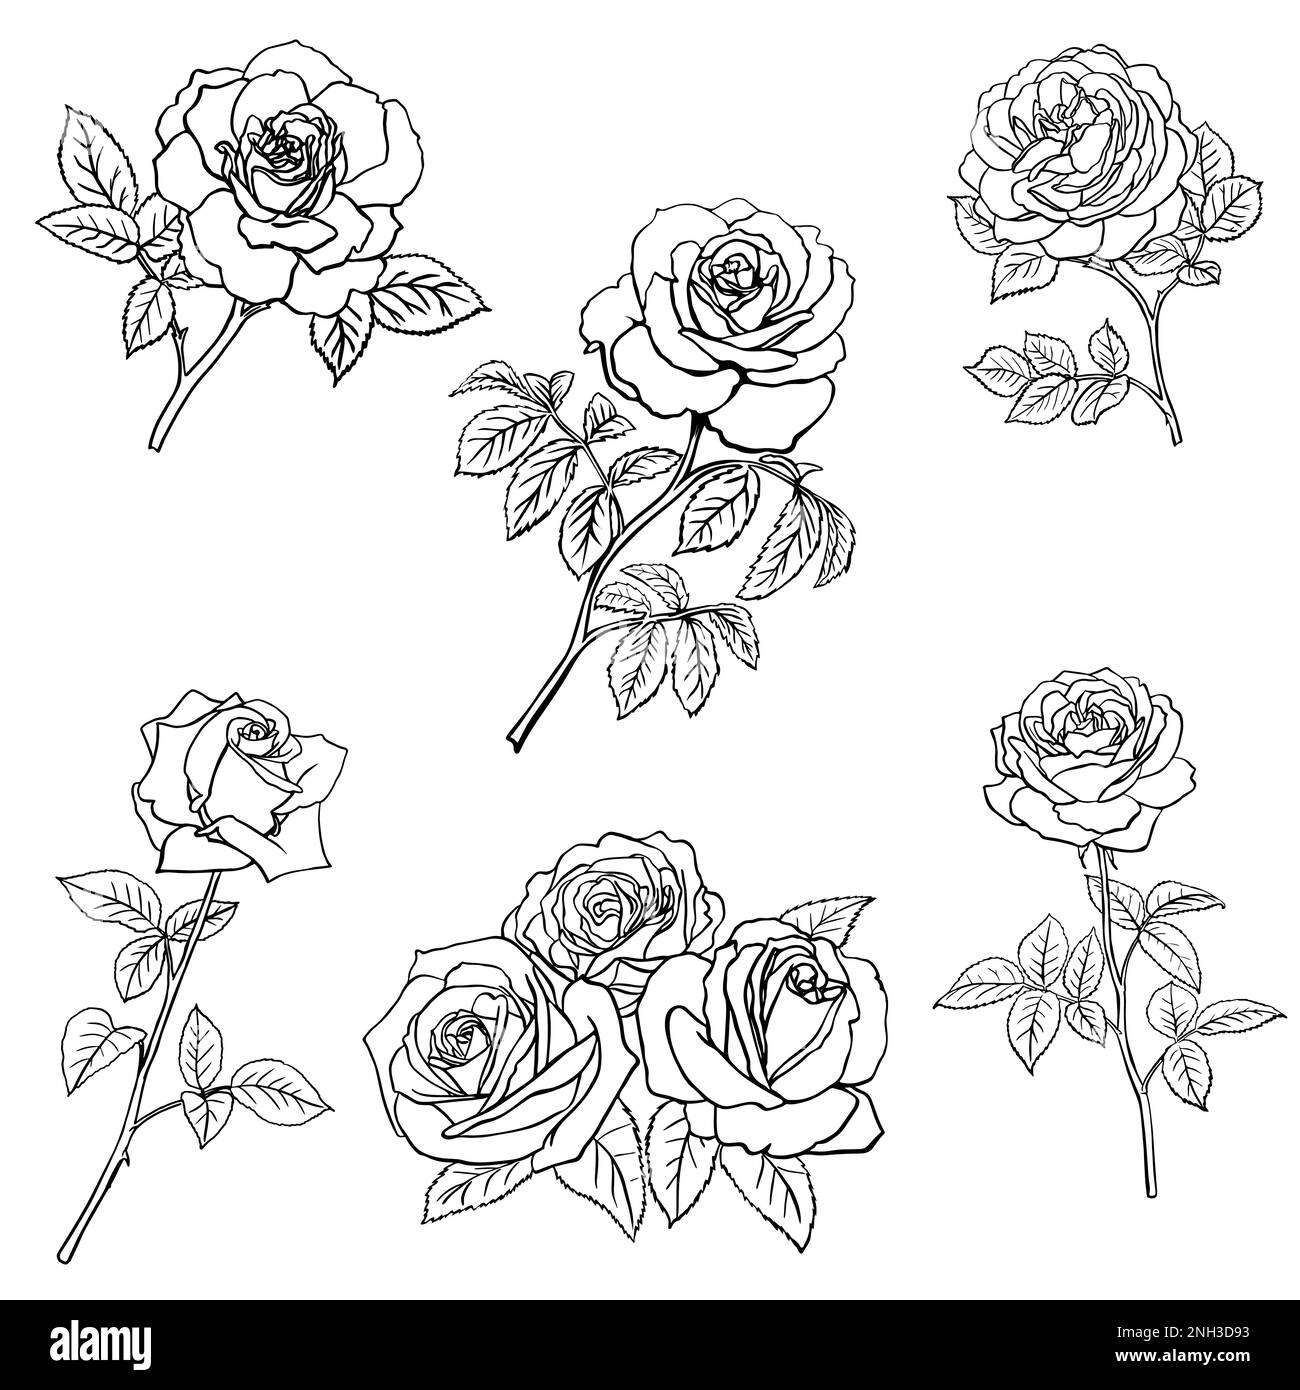 How to Draw a Rose The Ultimate Guide and 27 Beautiful Rose Drawing Ideas   Full Bloom Club